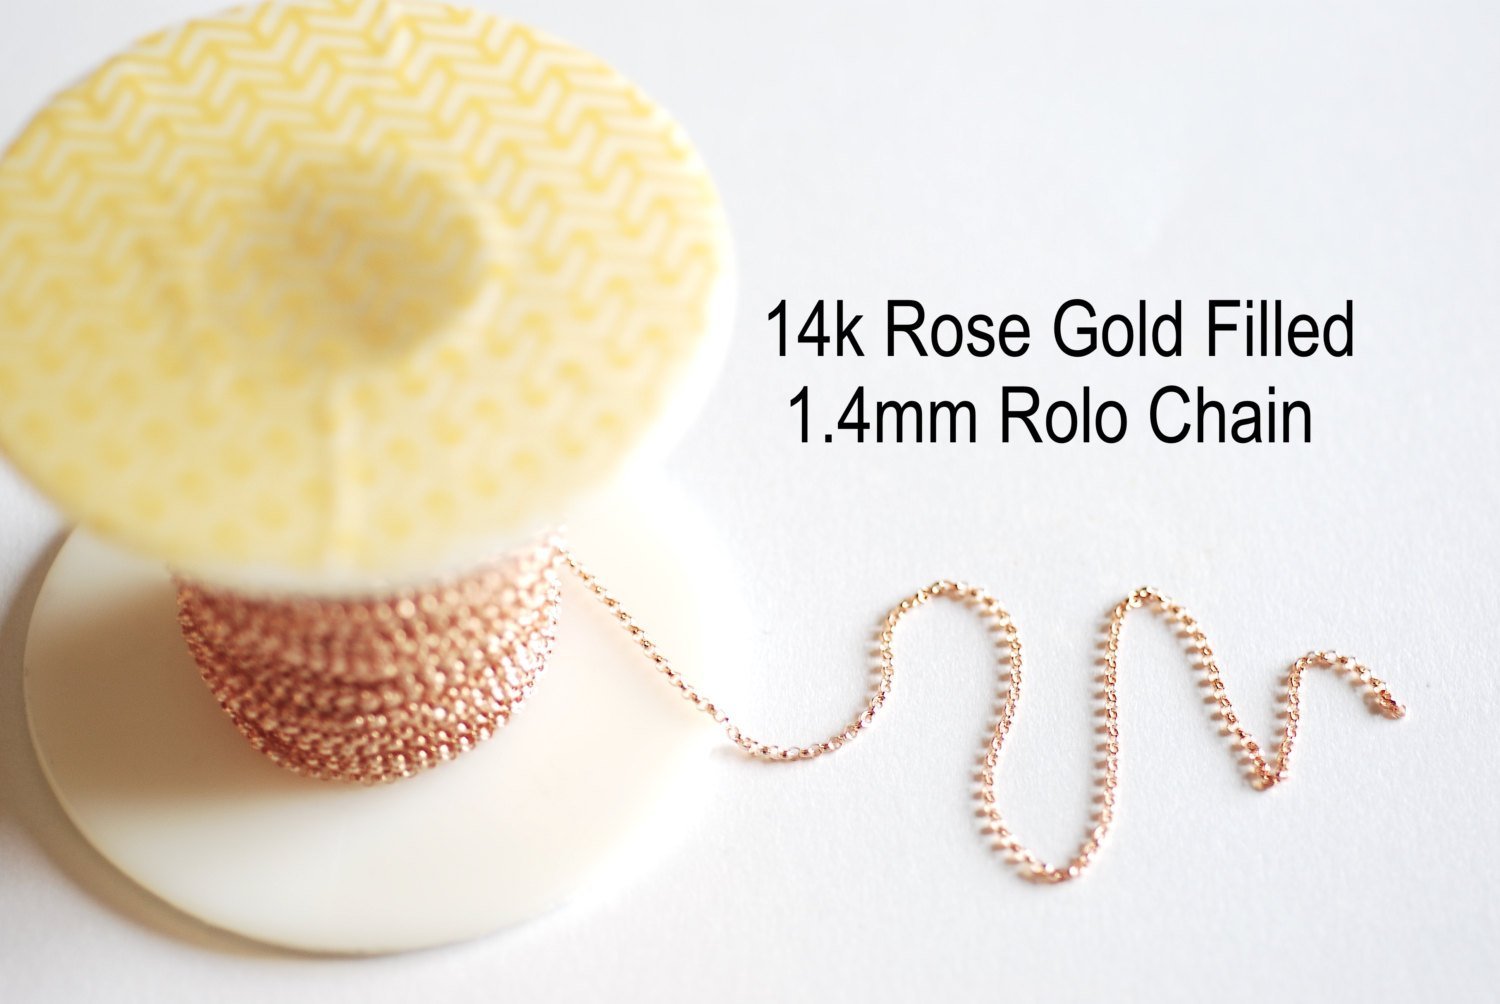 1.4mm Rolo Chain, Rose Gold-Filled, Bulk Pay Per Foot Uncut Spools For Jewelers